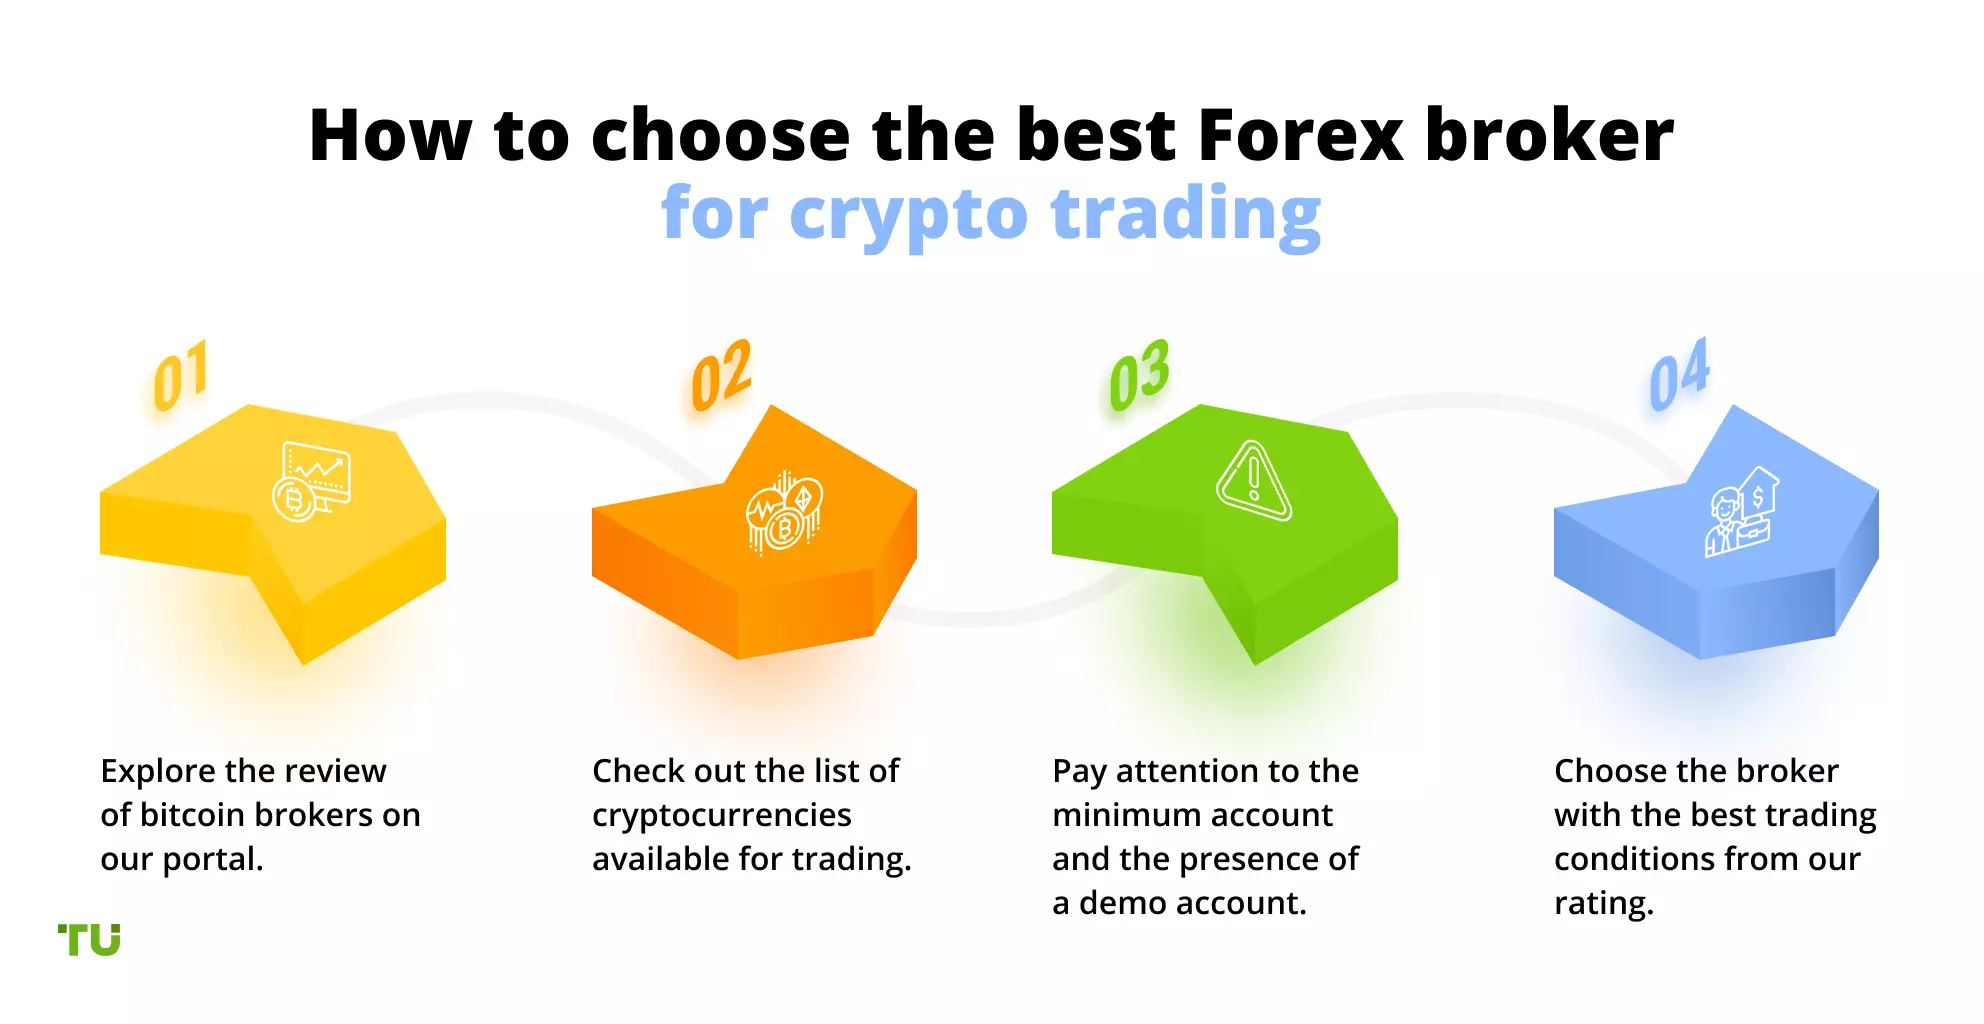 Top 5 methods to get additional benefits from Forex trading